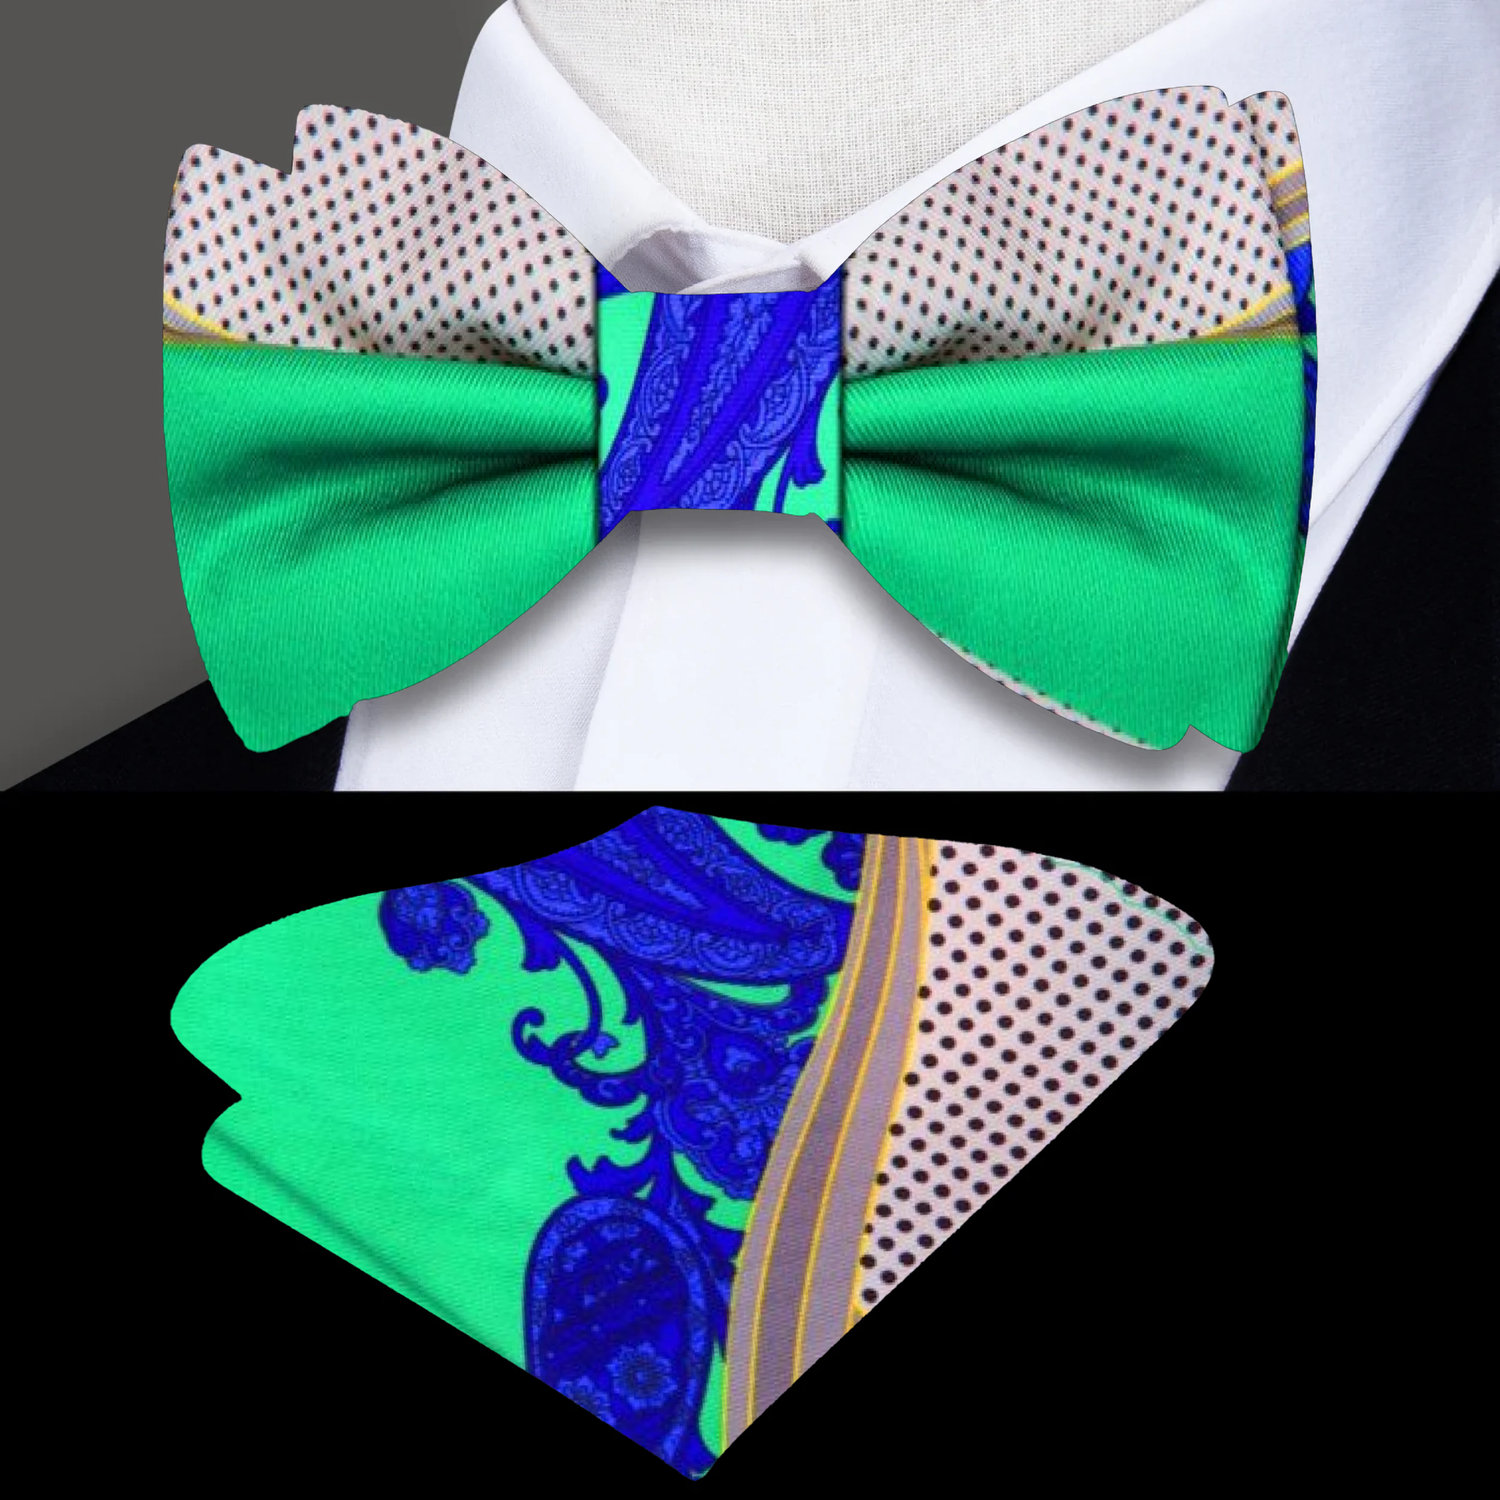 A Green, Blue, Grey, Brown Abstract Paisley Silk Bow Tie, Pocket Square||Green